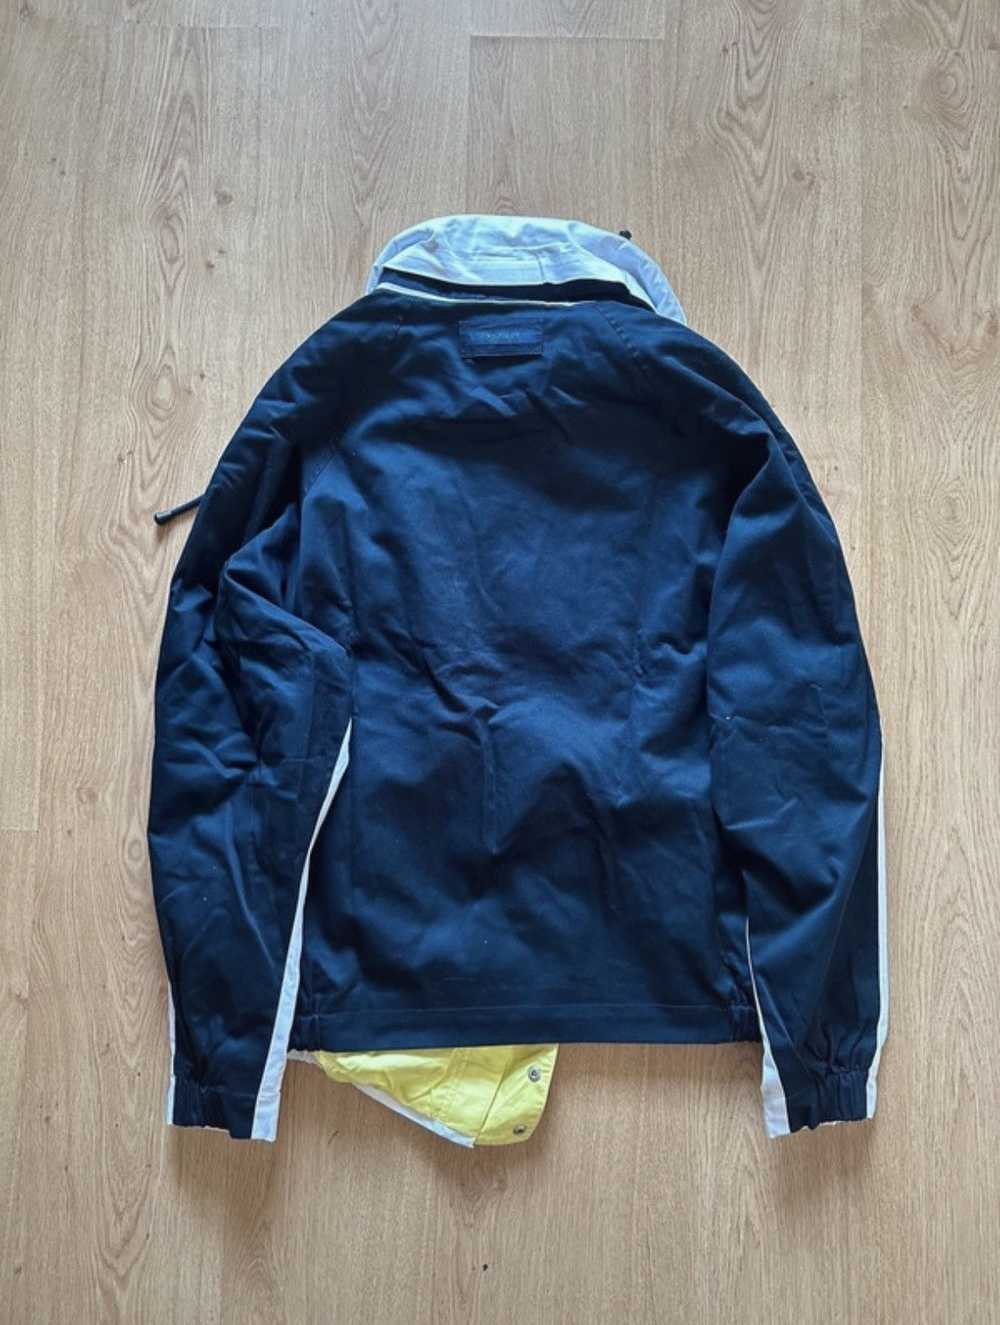 Y/Project Y/Project Asymetrical Jacket - image 6